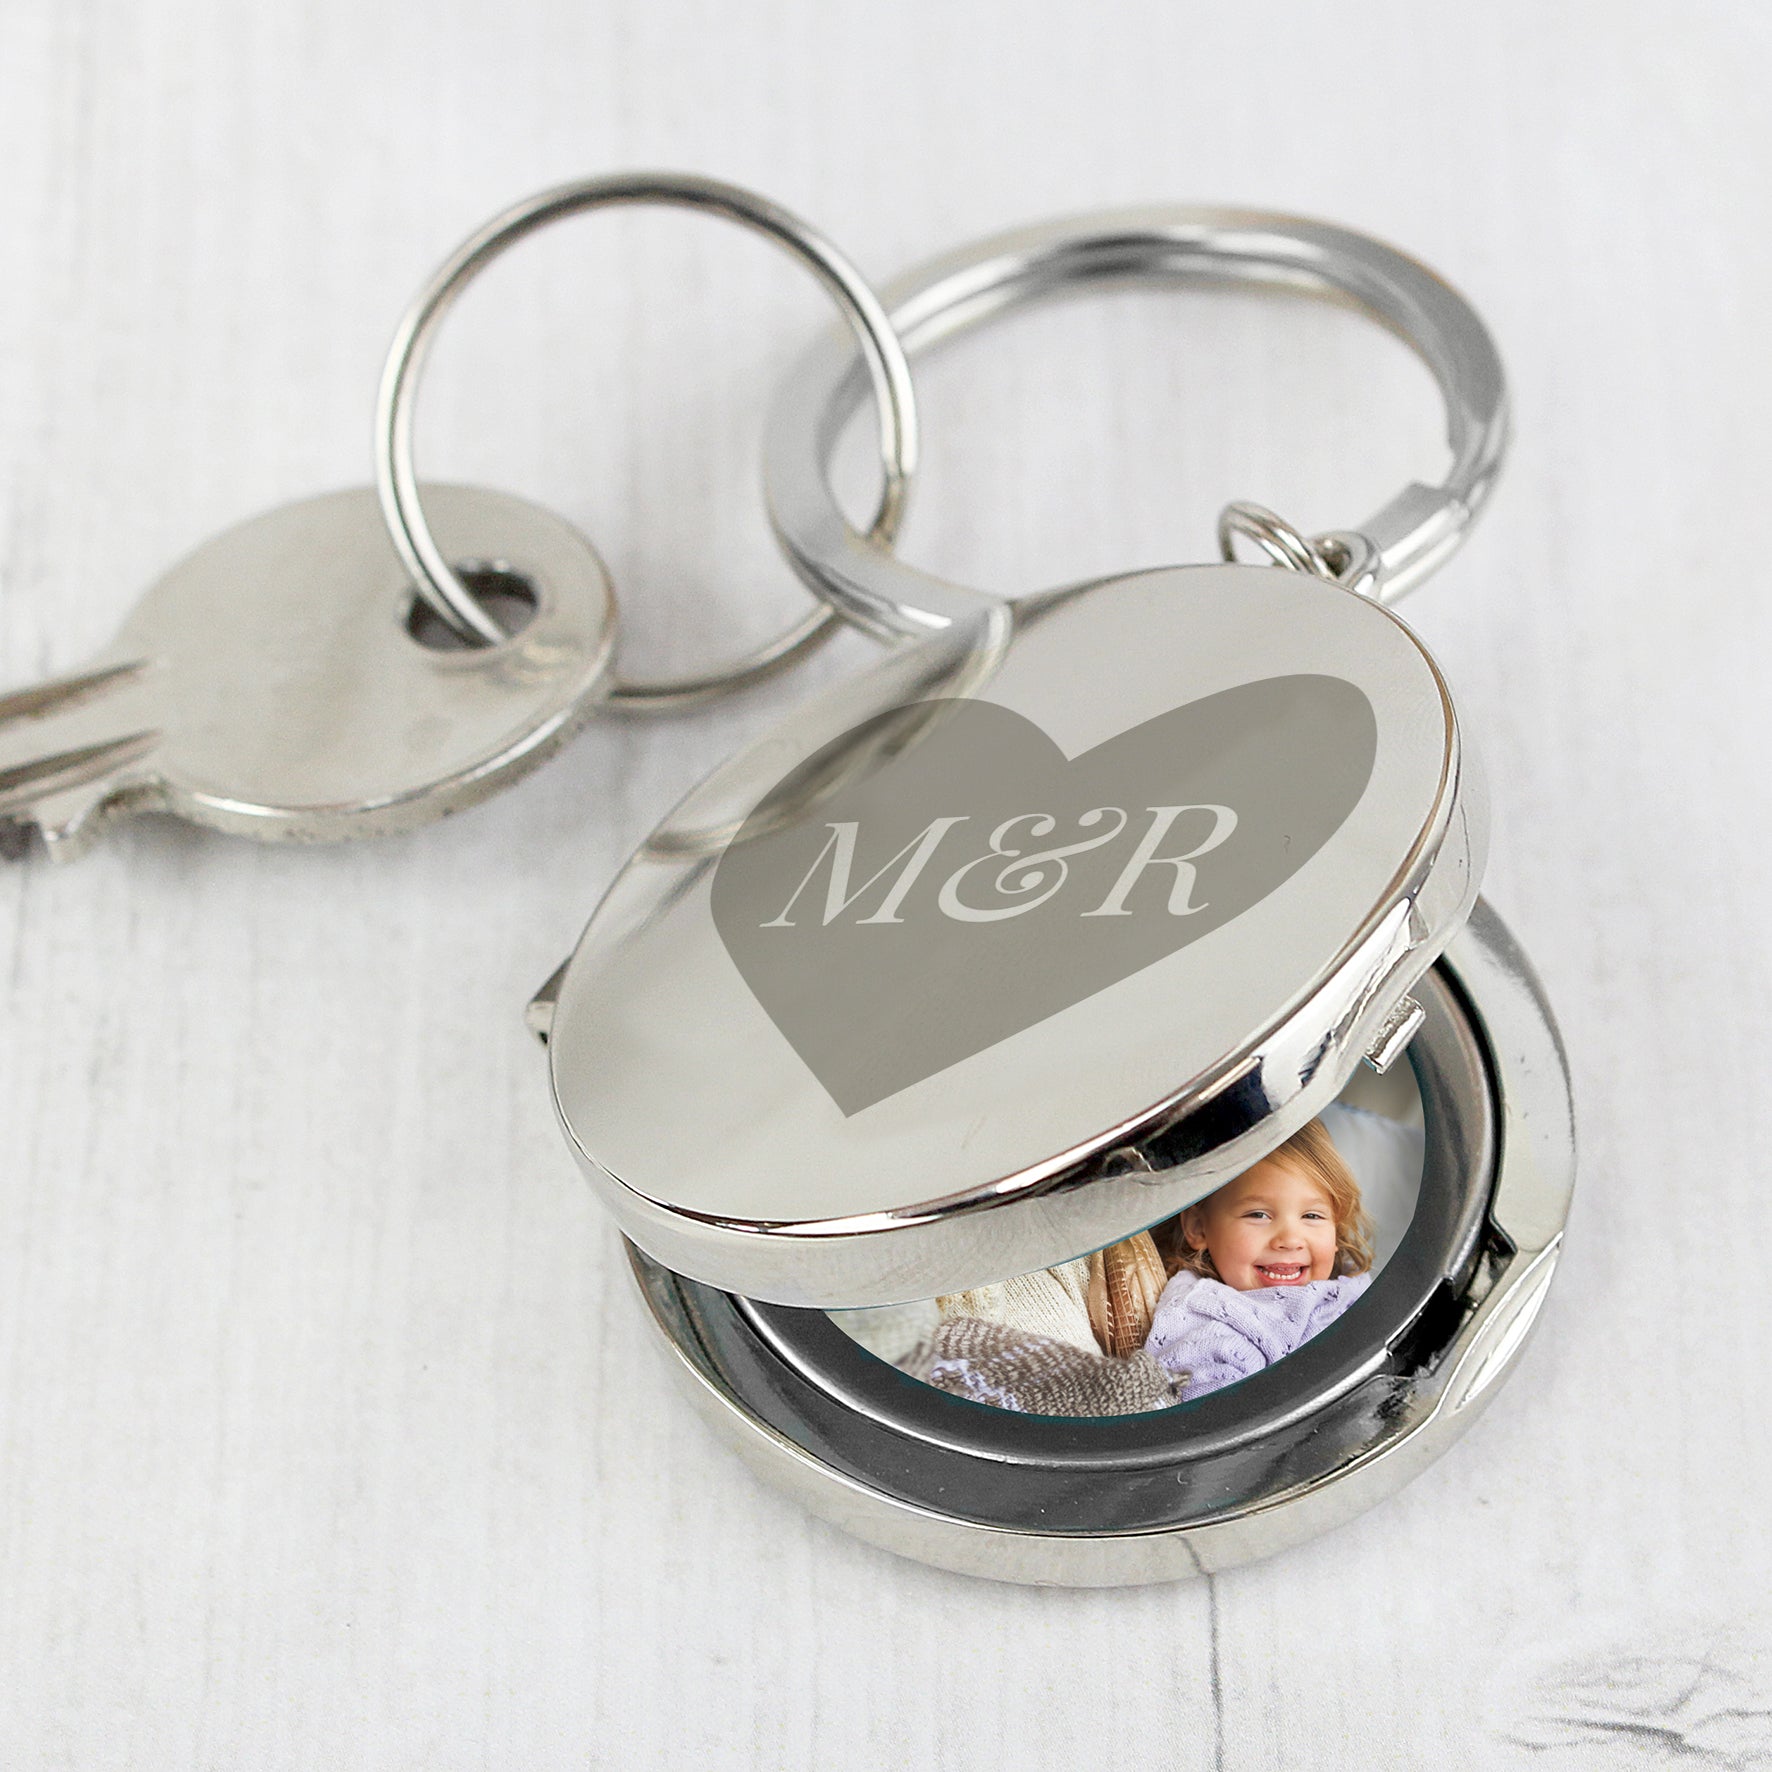 Personalised initial photo key ring